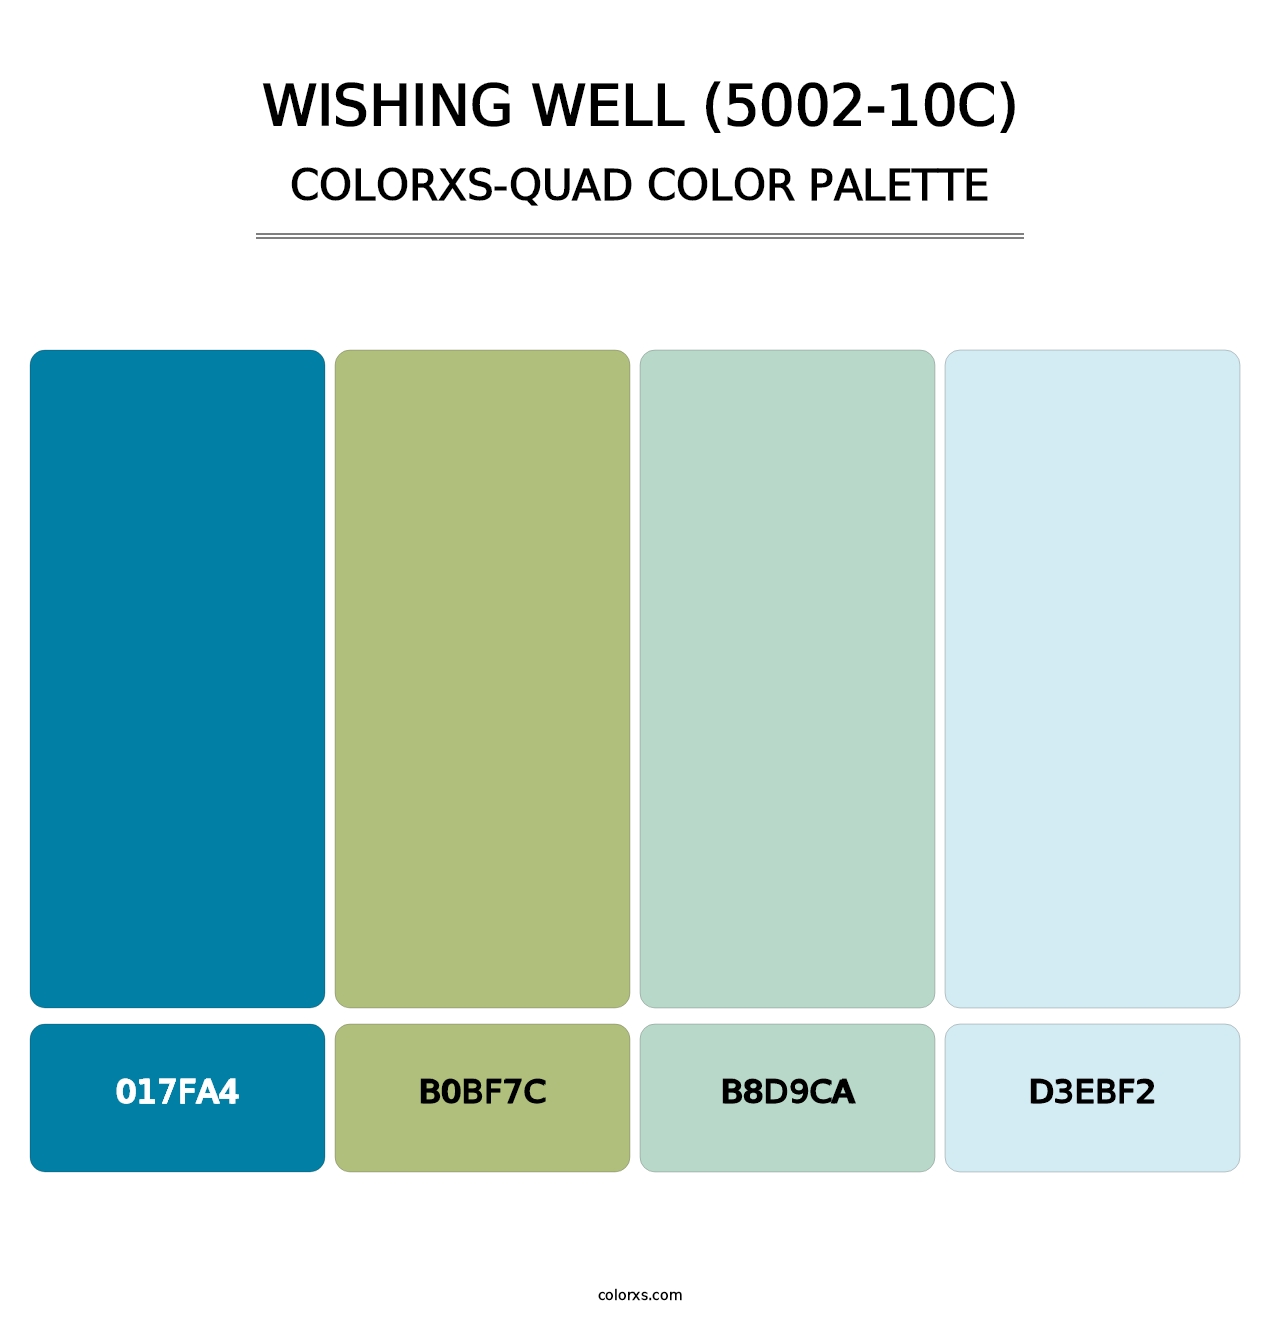 Wishing Well (5002-10C) - Colorxs Quad Palette